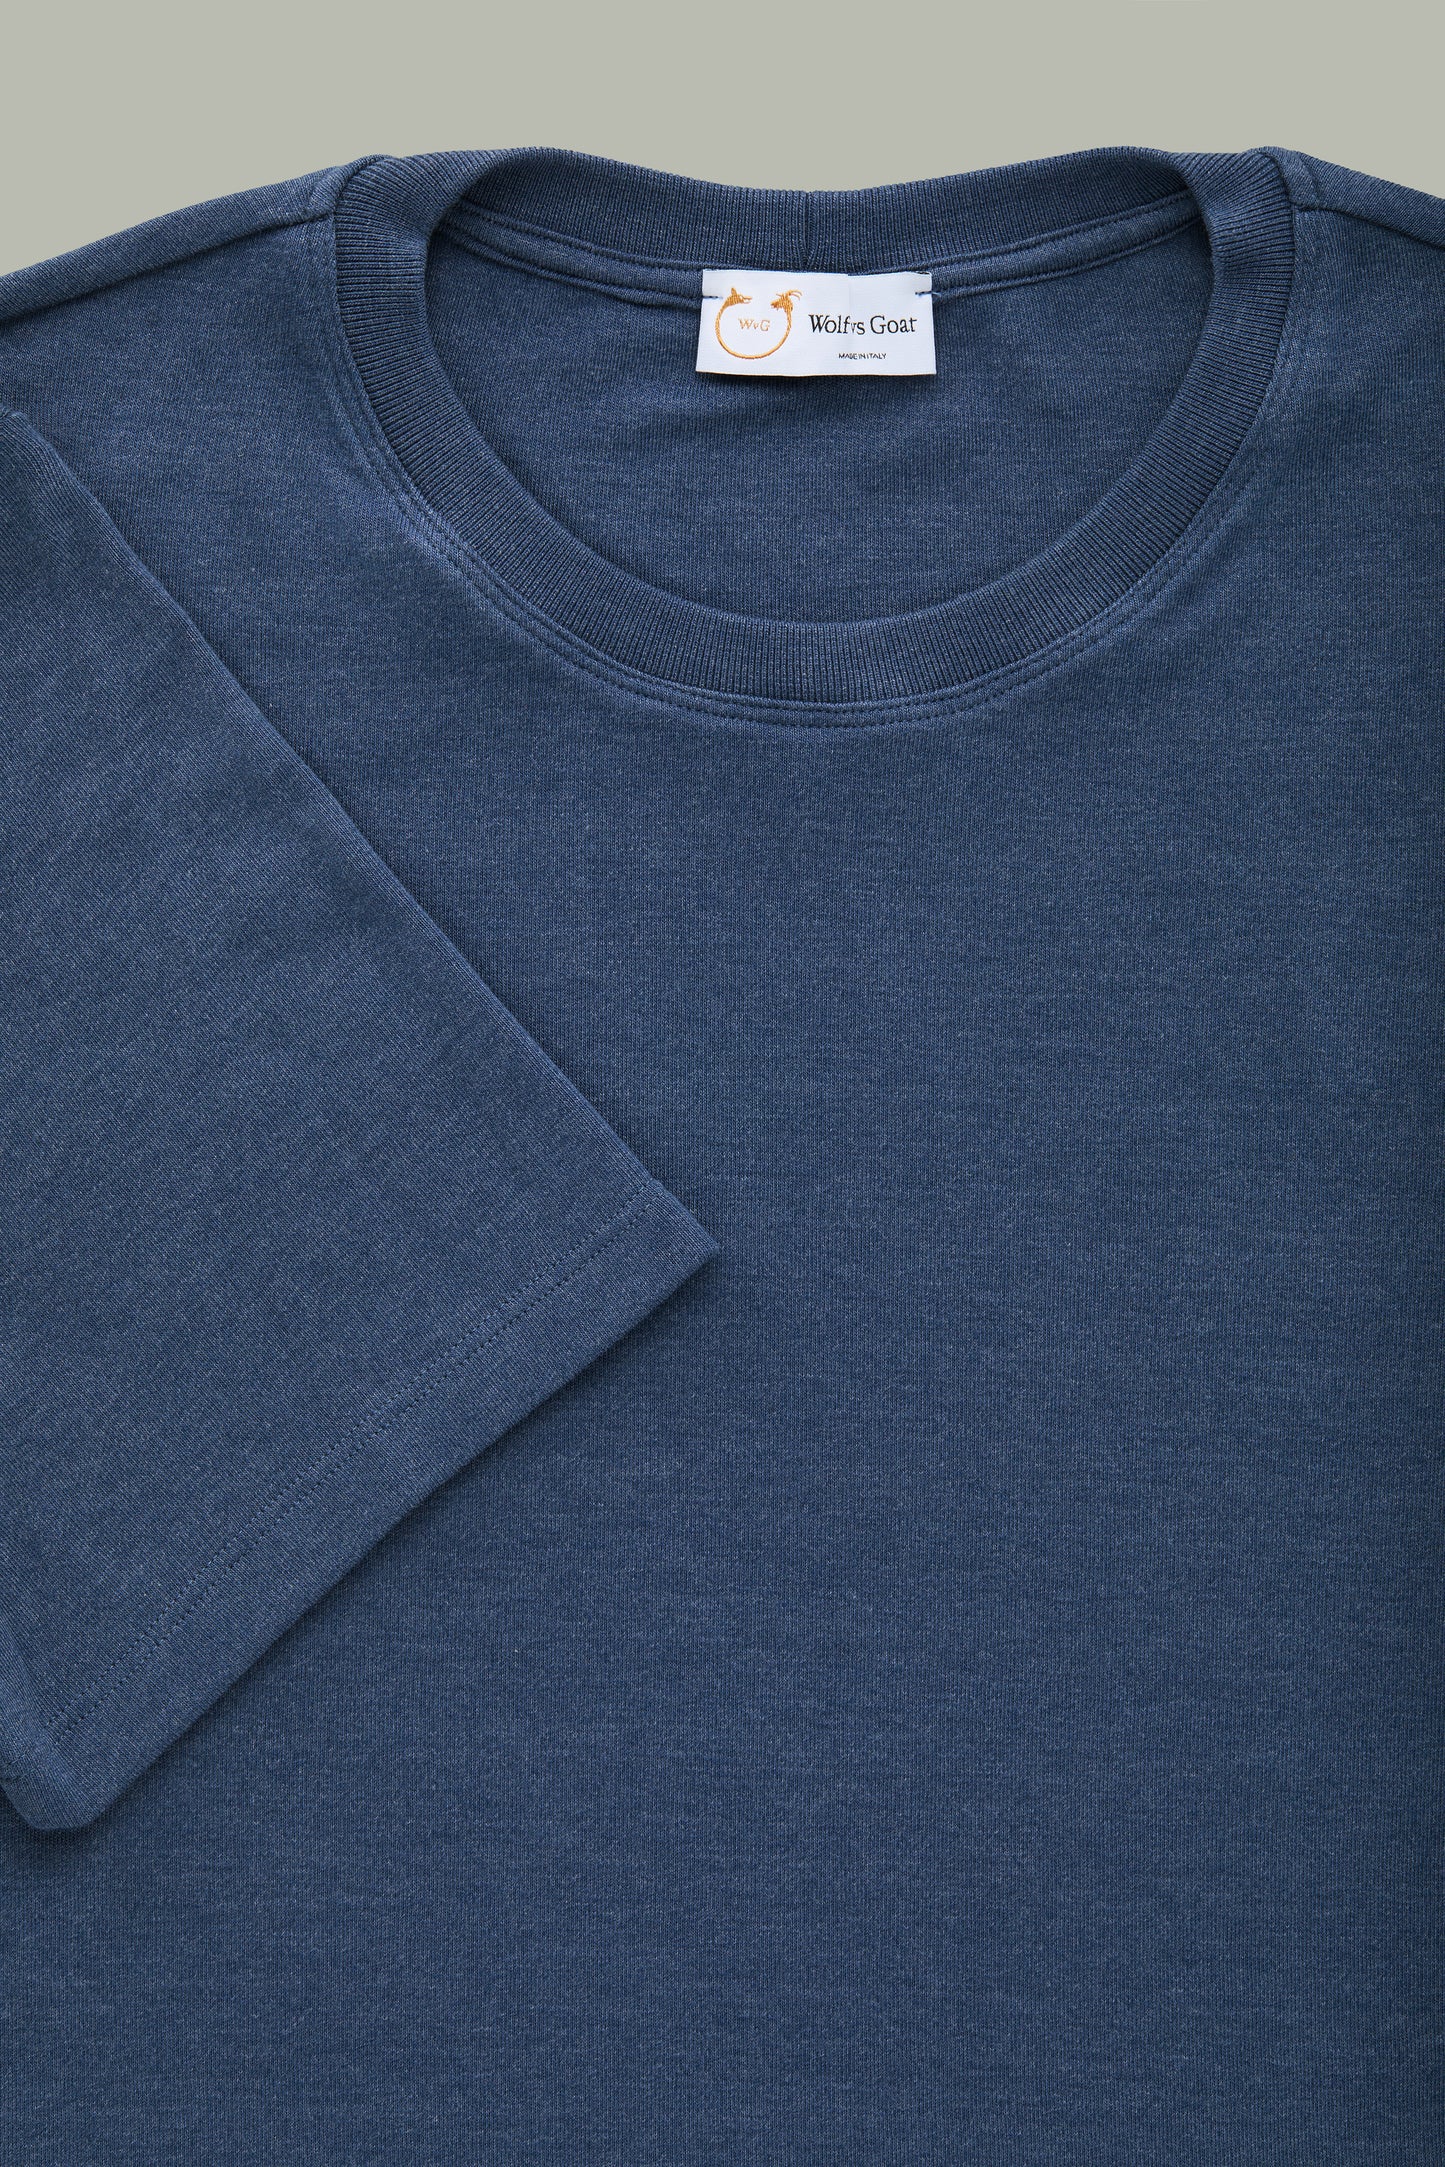 Domitian Piccolo Short Sleeve Crew Navy Piece Dyed